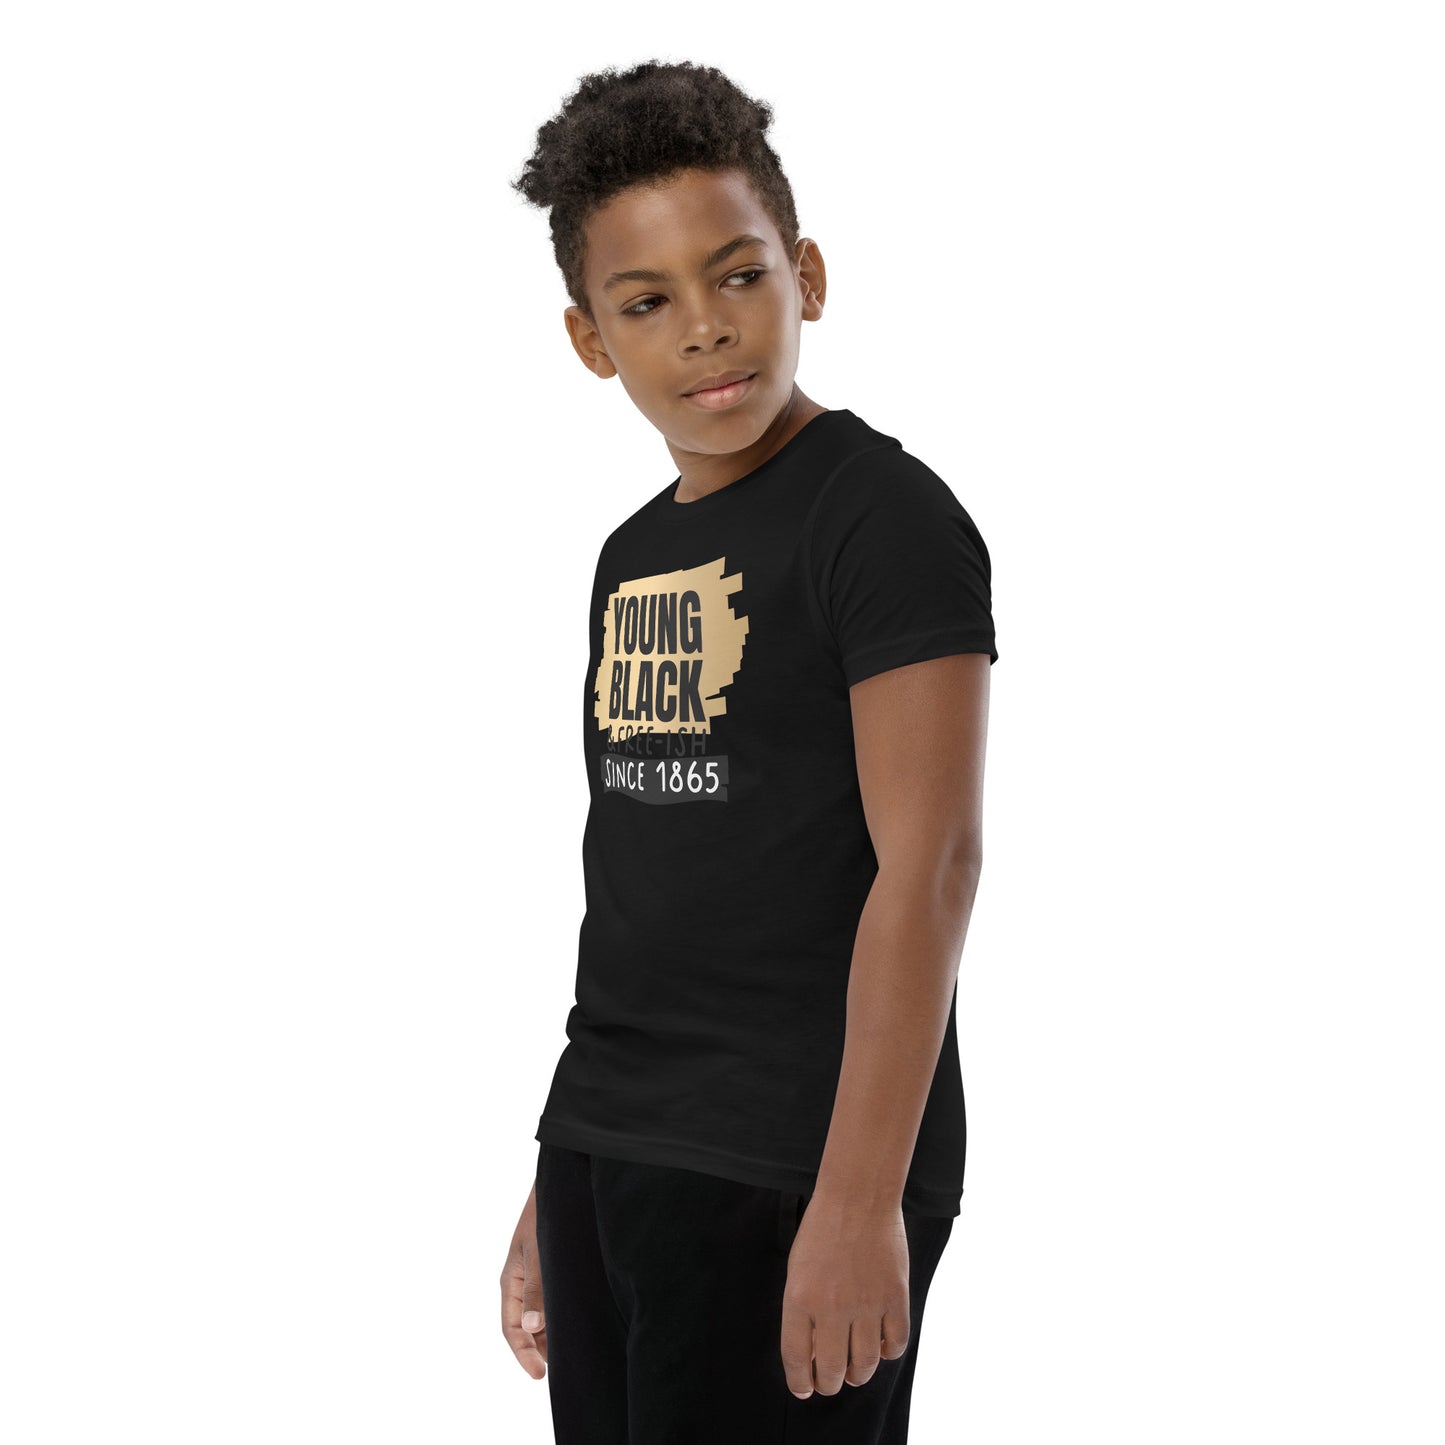 Youth Short Sleeve T-Shirt - Juneteenth Young Black Freeish Since 1865